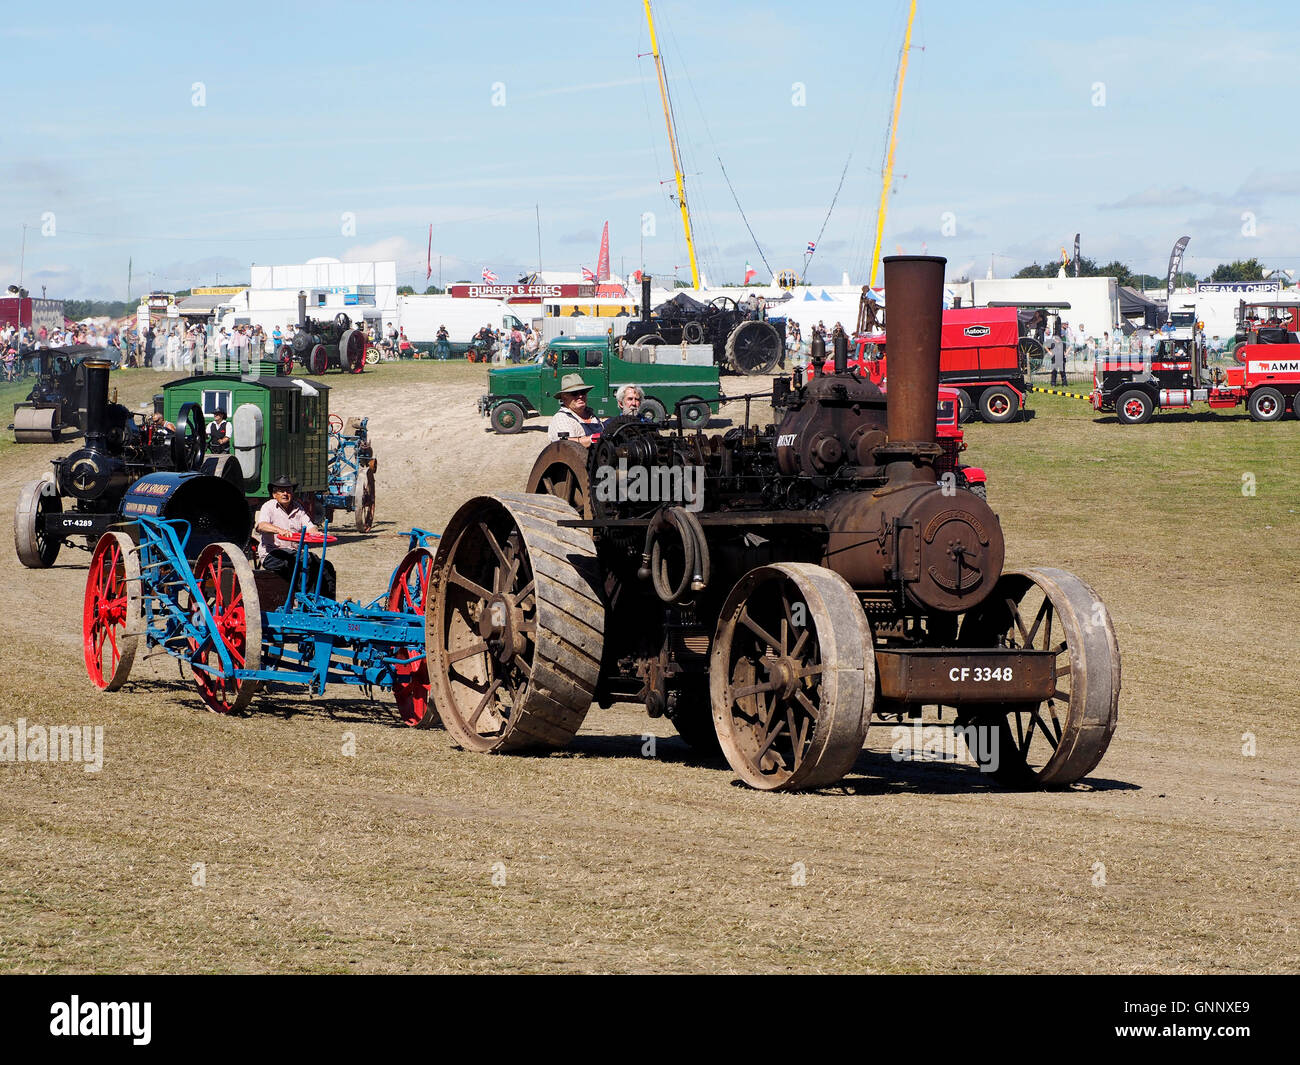 Demonstration of heavy haulage by steam traction engines at the Great Dorset Steam Fair 2016 Stock Photo